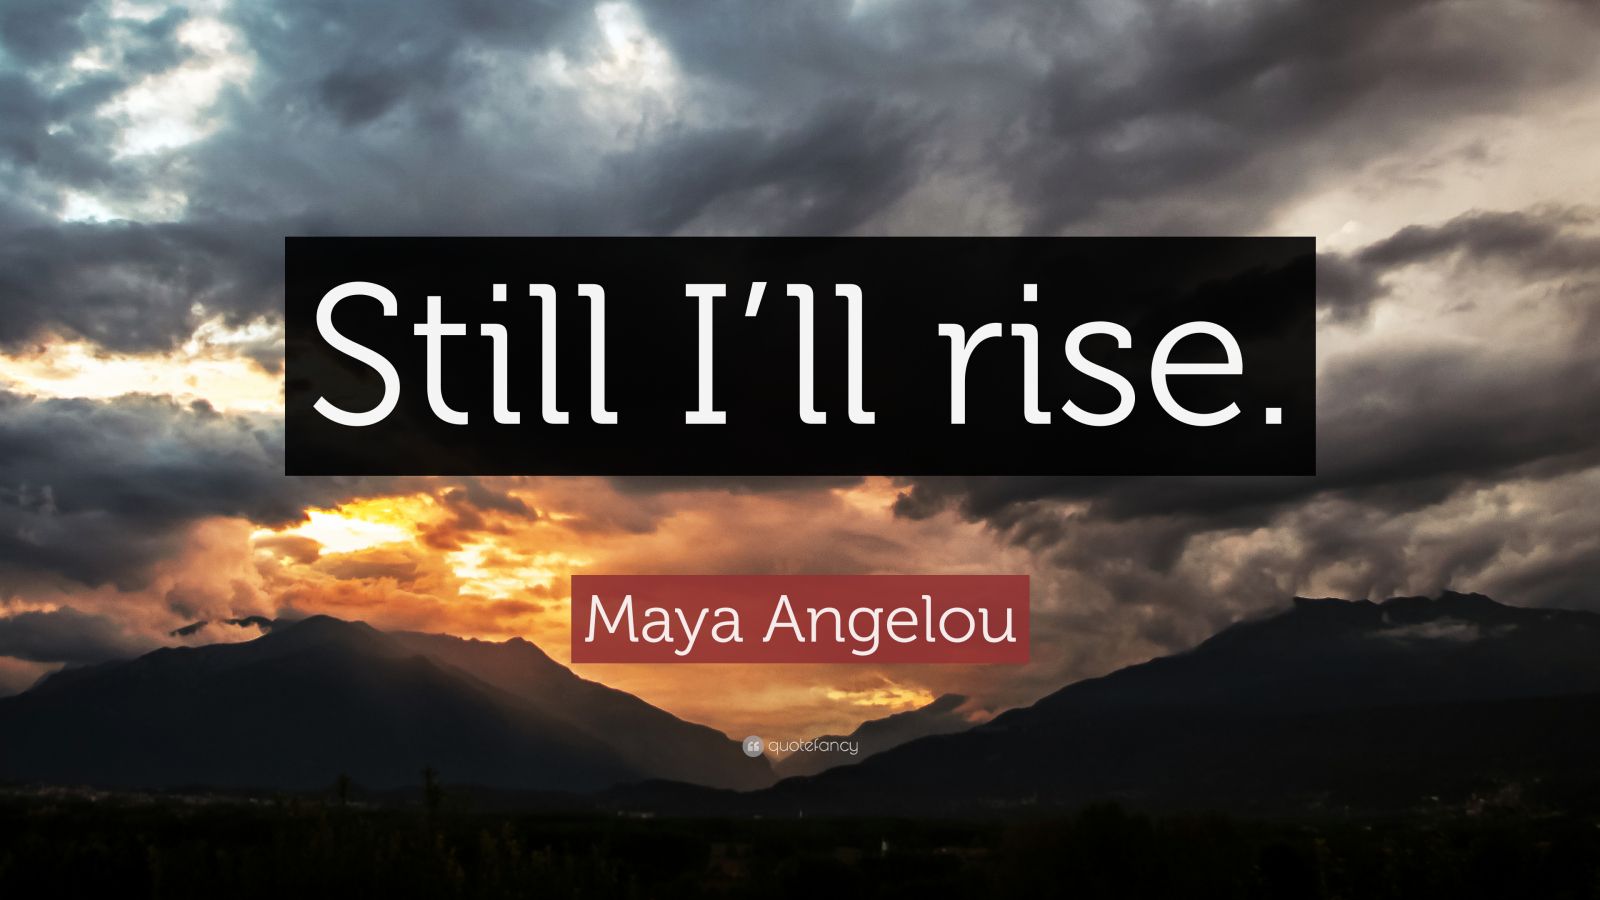 maya angelou rise quote